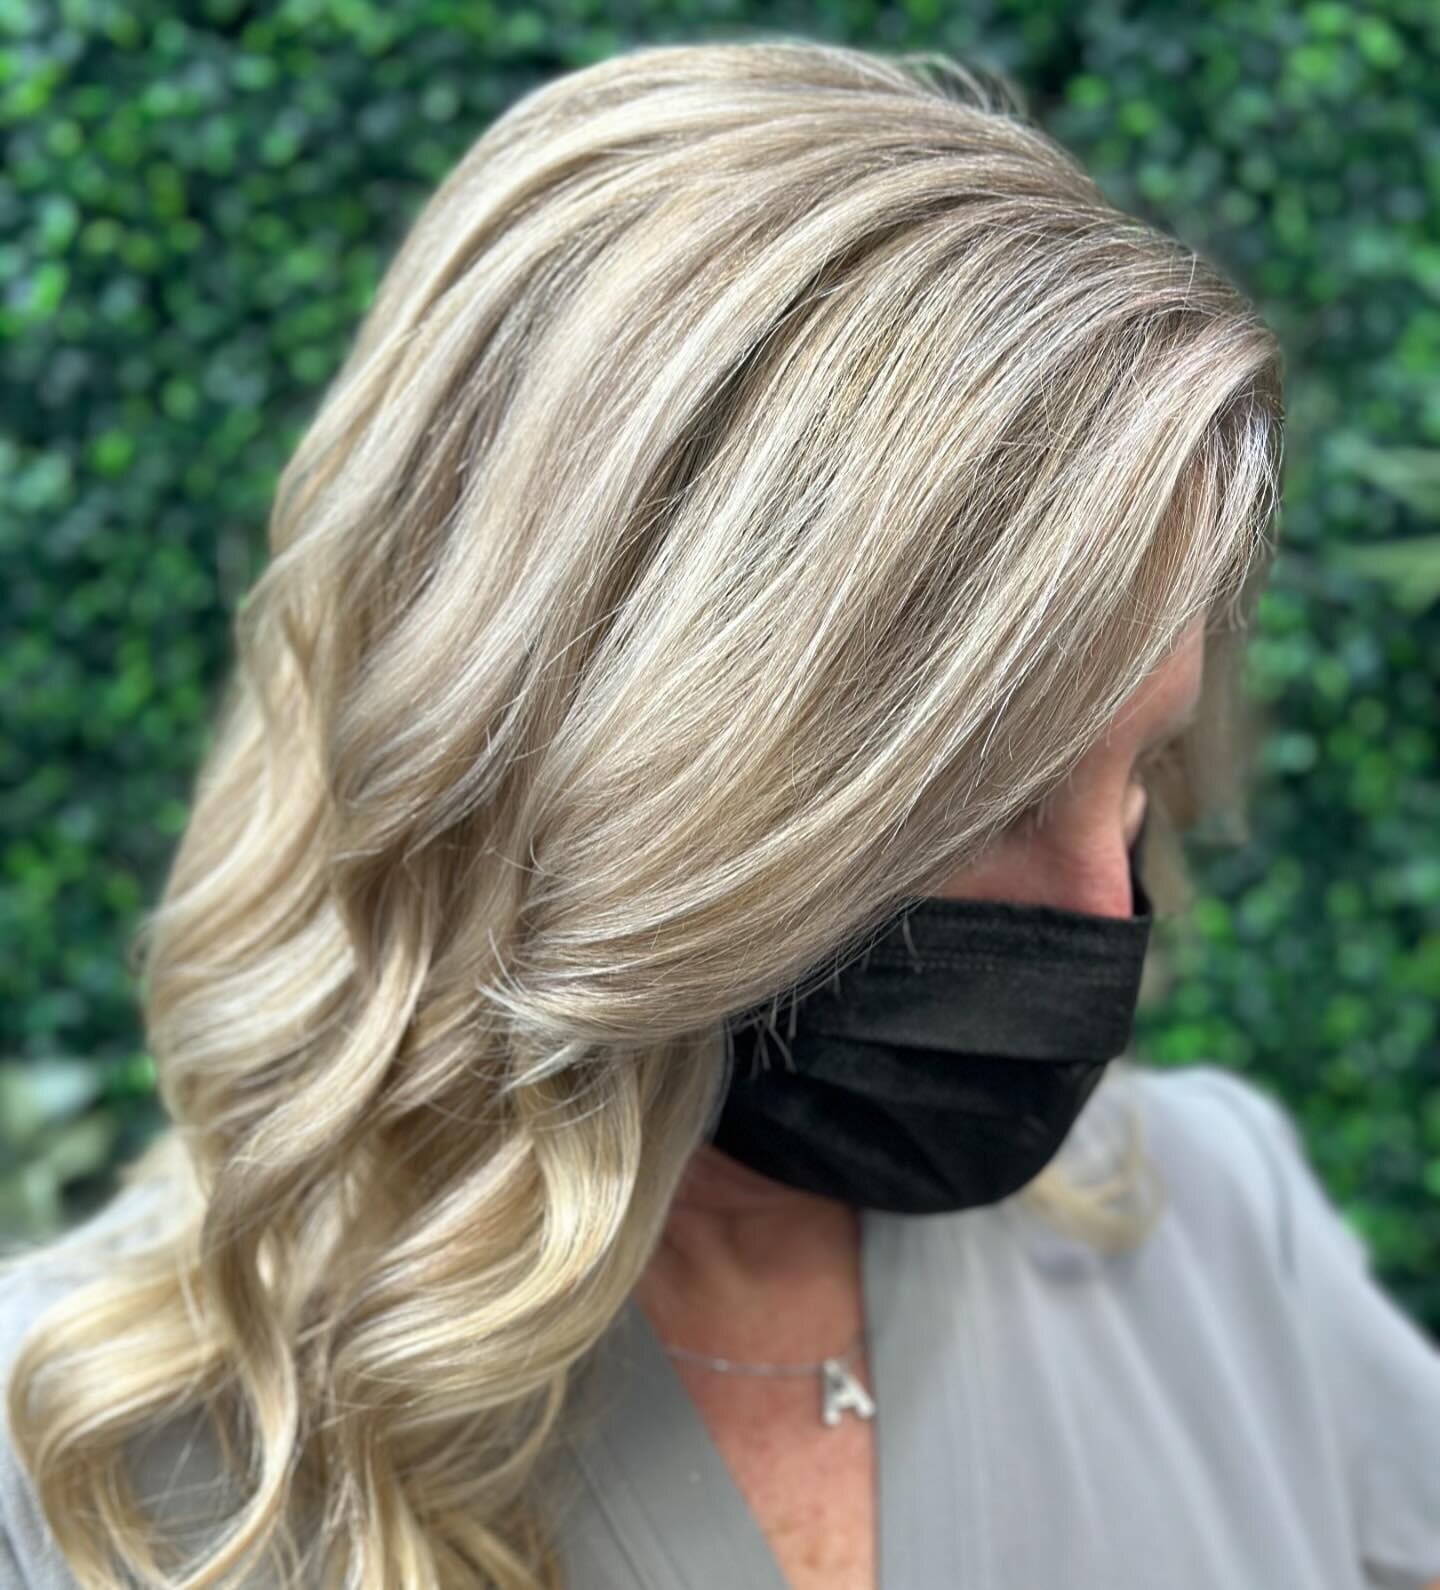 Fresh blonde highlights with a baby low light 😍😍😍. Love❤️